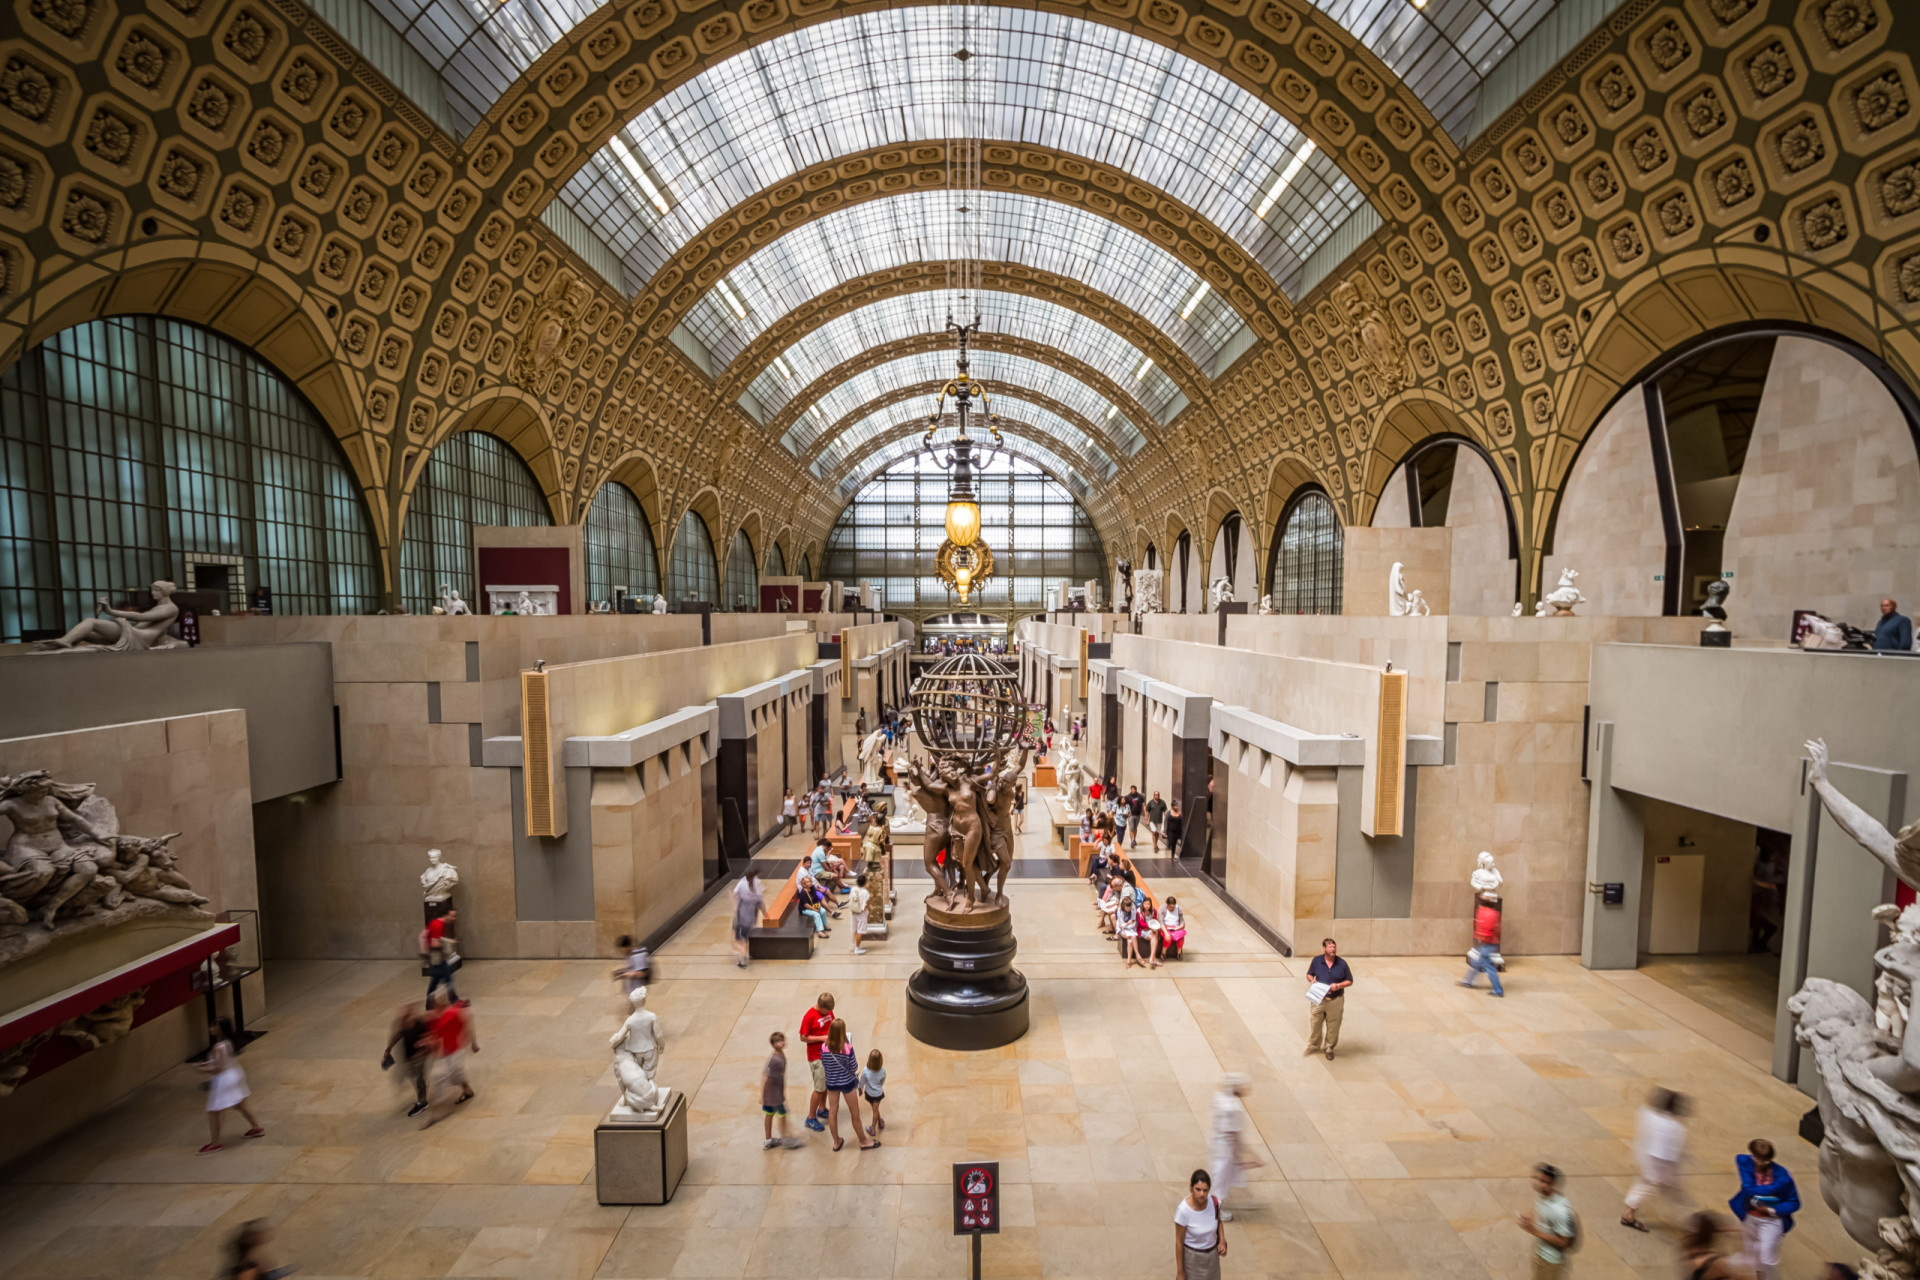 <p>The Musée d'Orsay is a popular tourist attraction that draws large crowds, making it a target for pickpockets.</p><p><a href="https://www.msn.com/en-us/community/channel/vid-7xx8mnucu55yw63we9va2gwr7uihbxwc68fxqp25x6tg4ftibpra?cvid=94631541bc0f4f89bfd59158d696ad7e">Follow us and access great exclusive content every day</a></p>